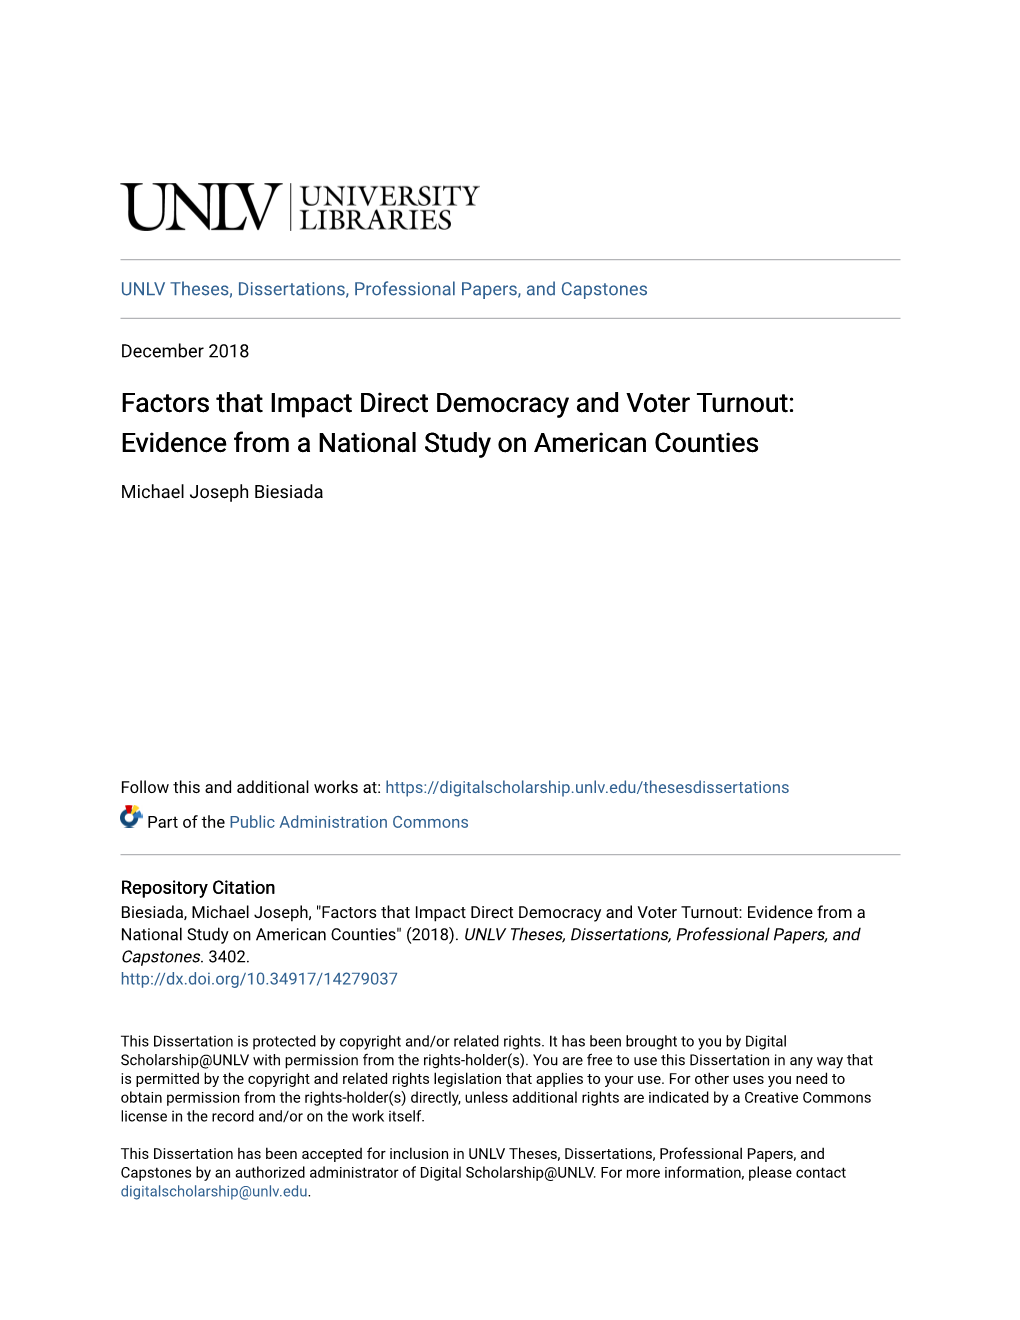 Factors That Impact Direct Democracy and Voter Turnout: Evidence from a National Study on American Counties